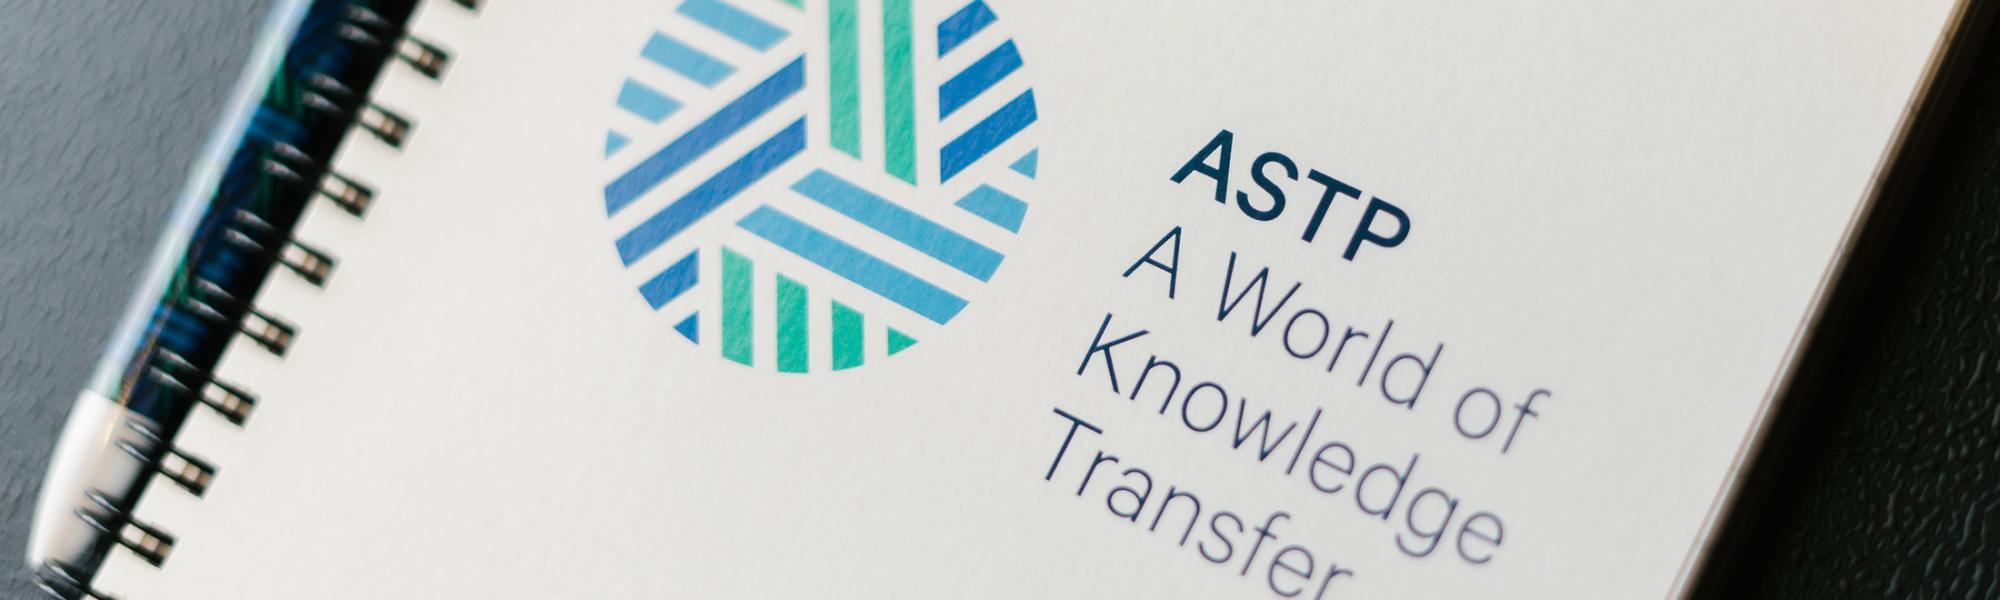 ASTP - Terms and Conditions of ASTP Membership